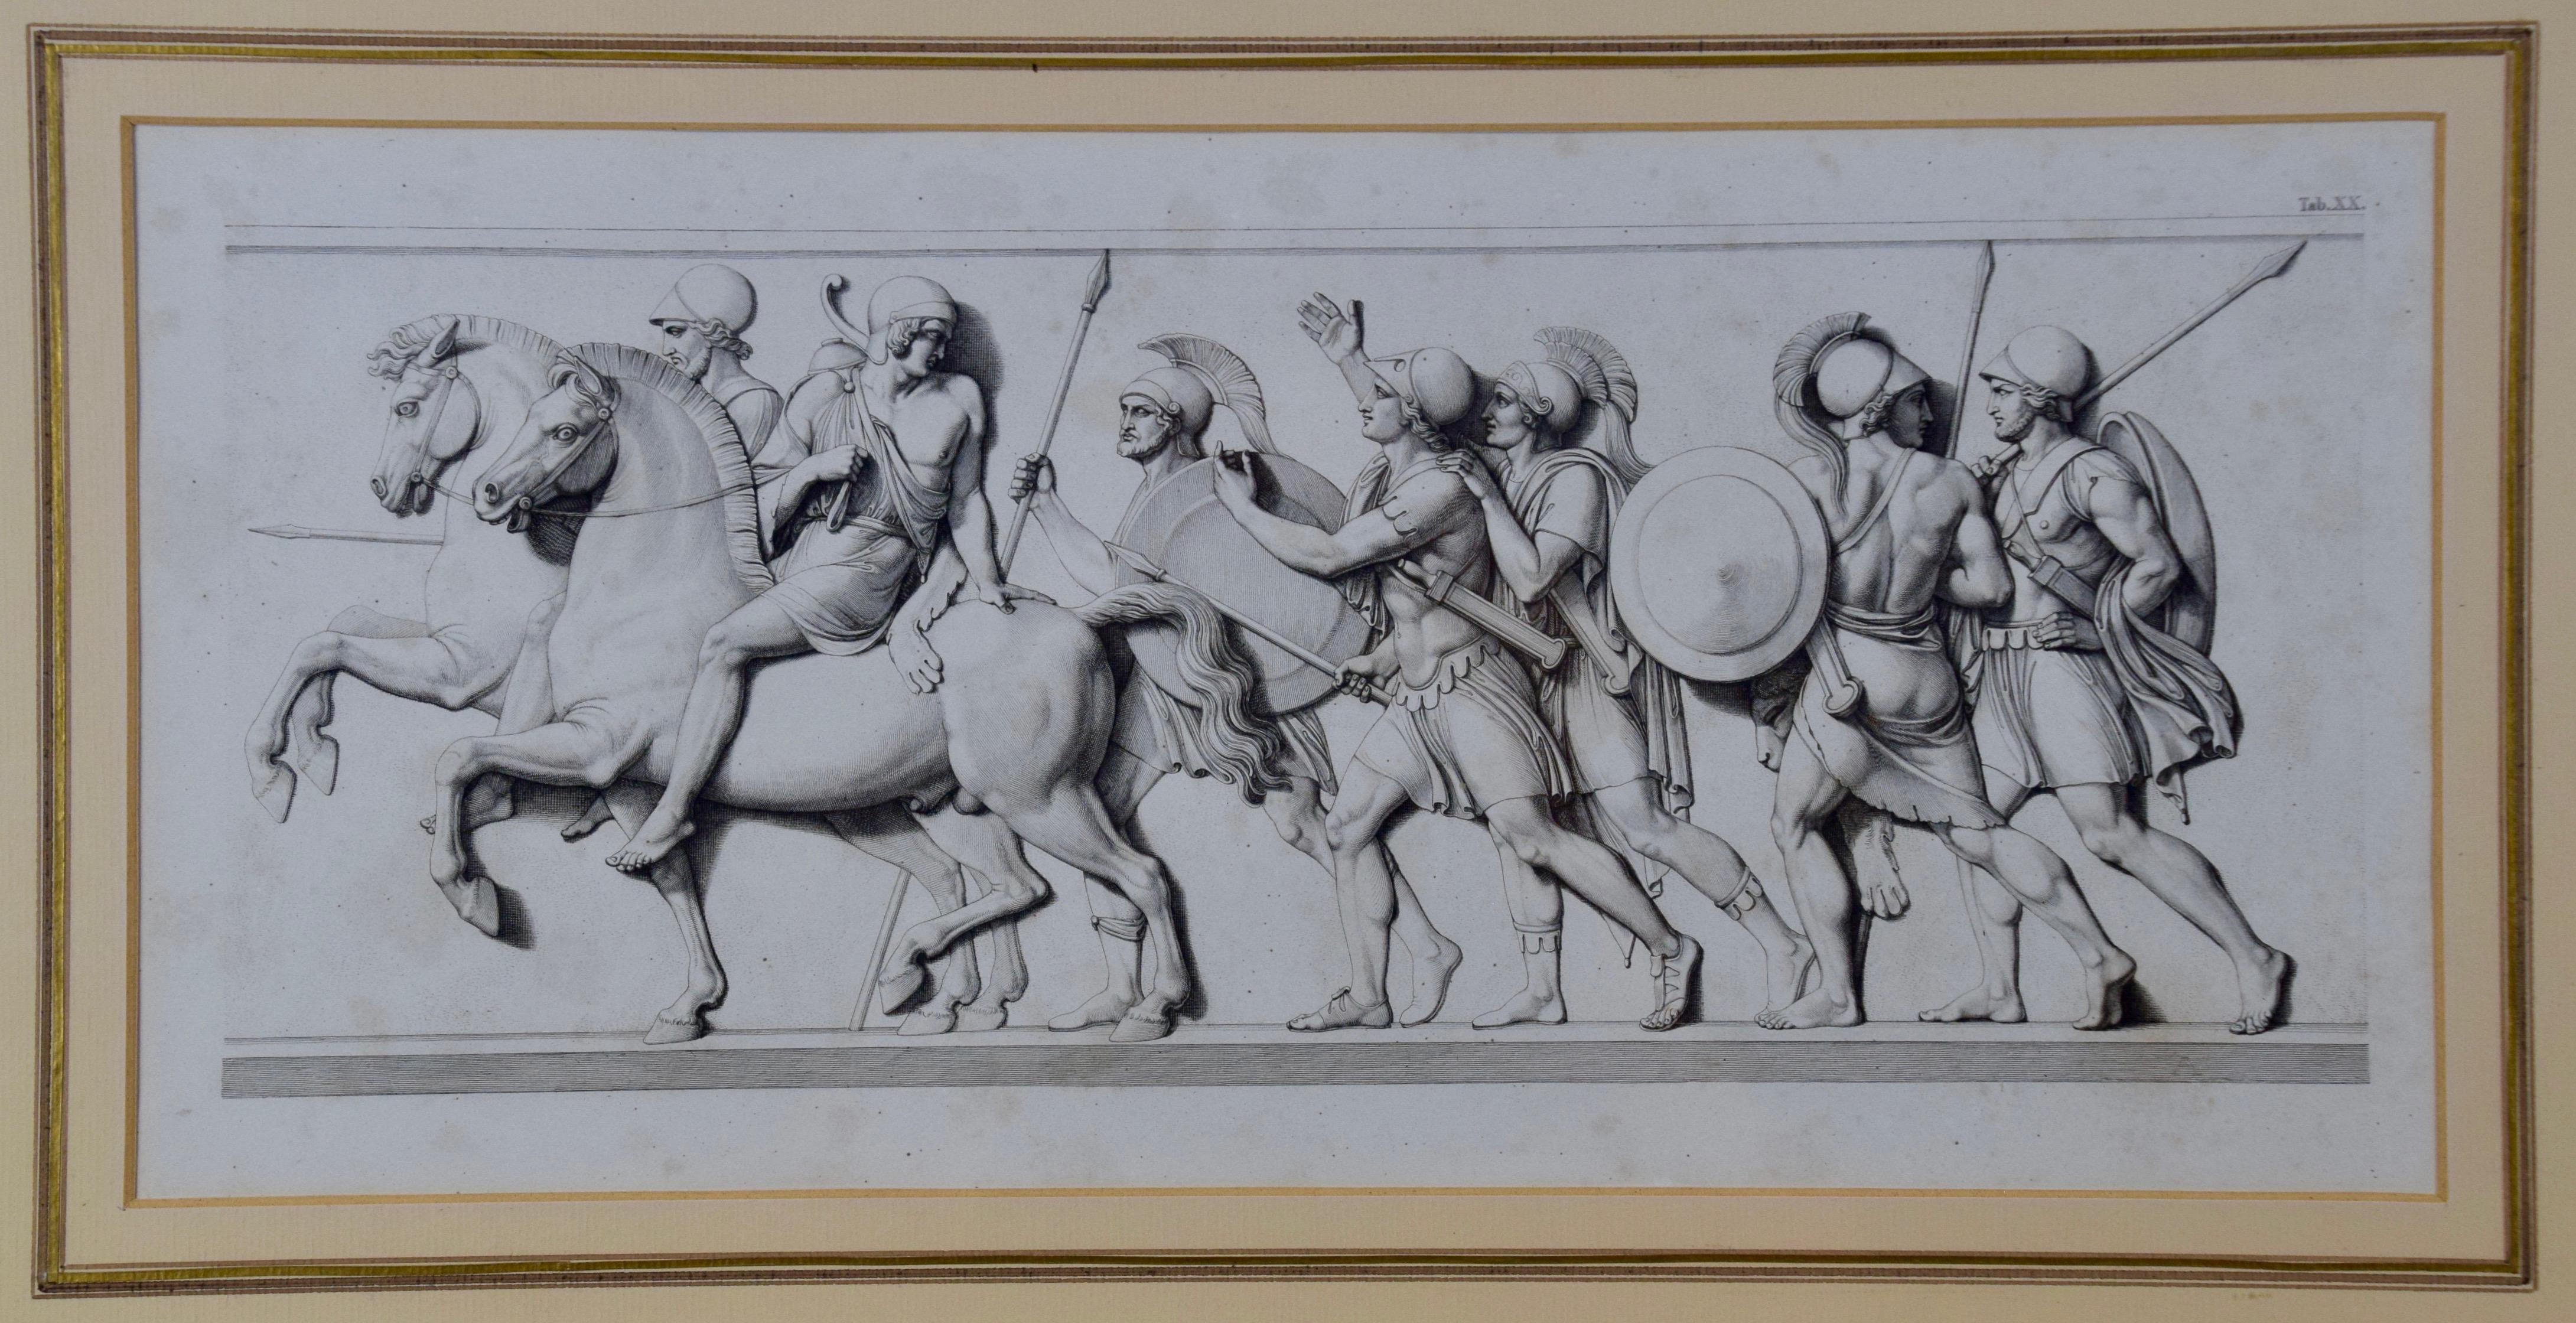 A Set of Four Engravings of Processions of Roman or Greek Soldiers and Citizens - Print by Unknown